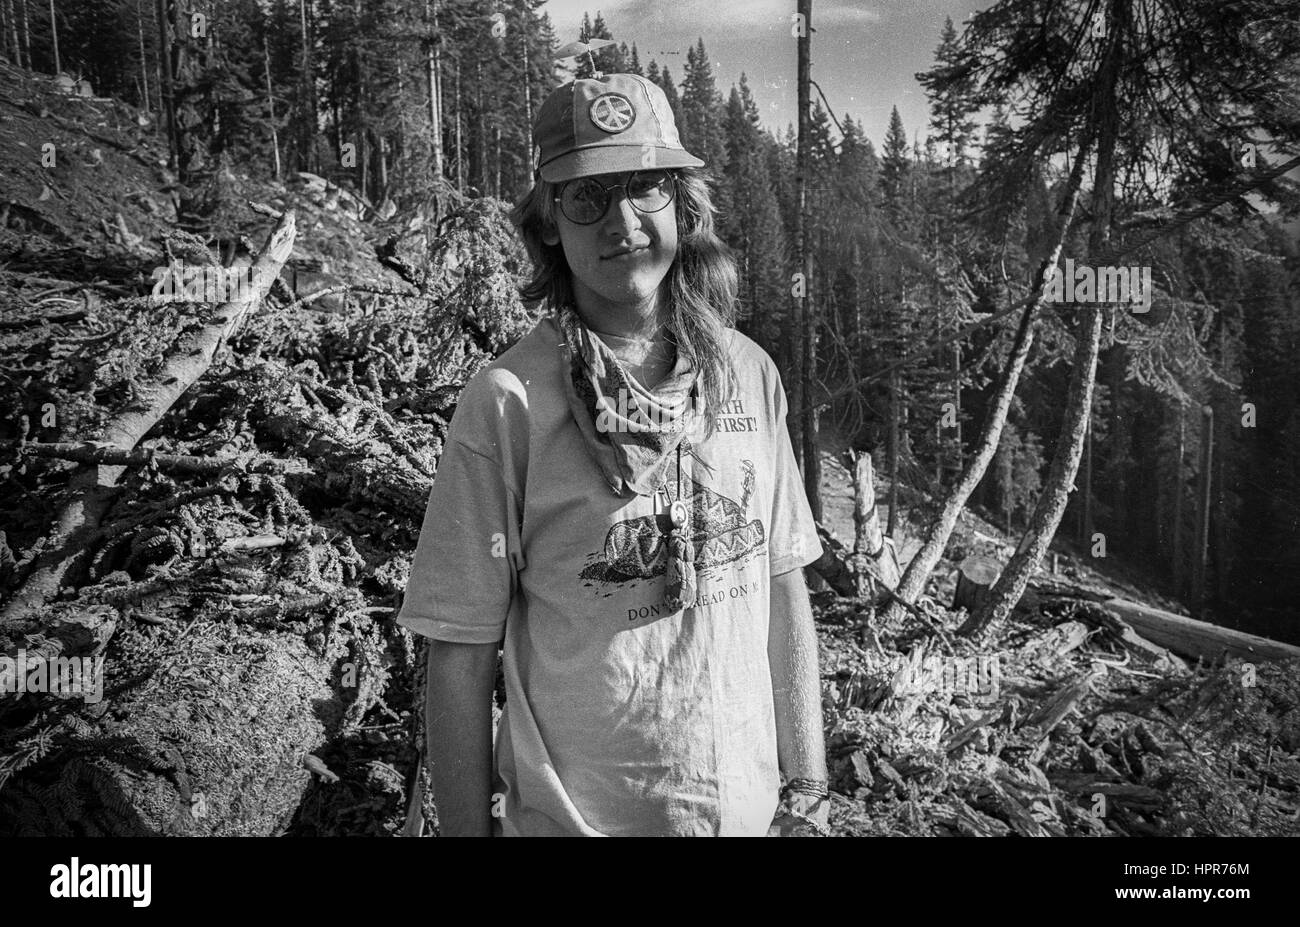 Earth First! Redwood Summer. Sequoia National Forest. 1989 (Photo by Jeremy Hogan) Stock Photo